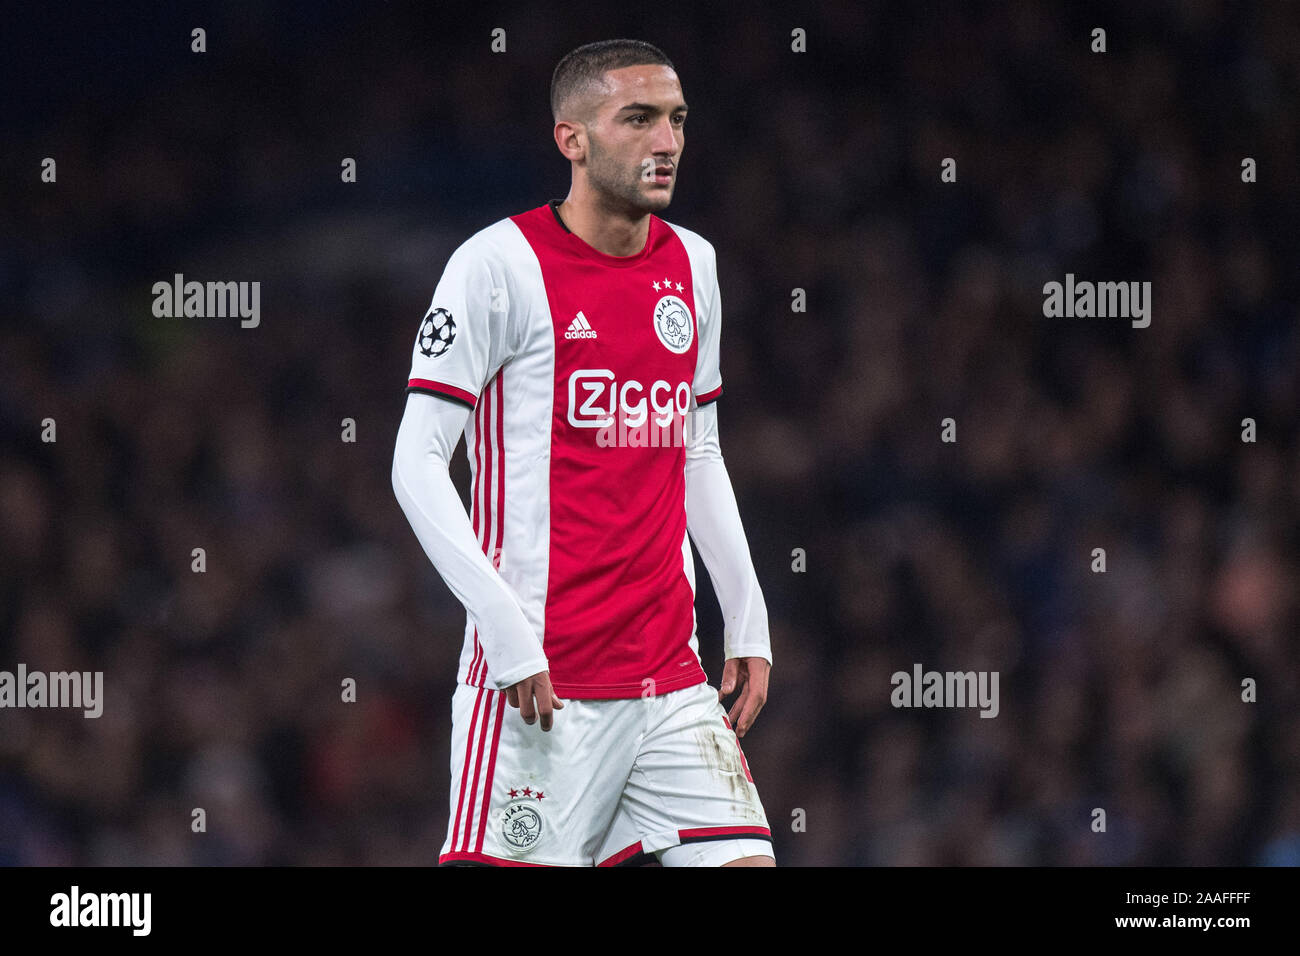 A F C Ajax High Resolution Stock Photography and Images - Alamy